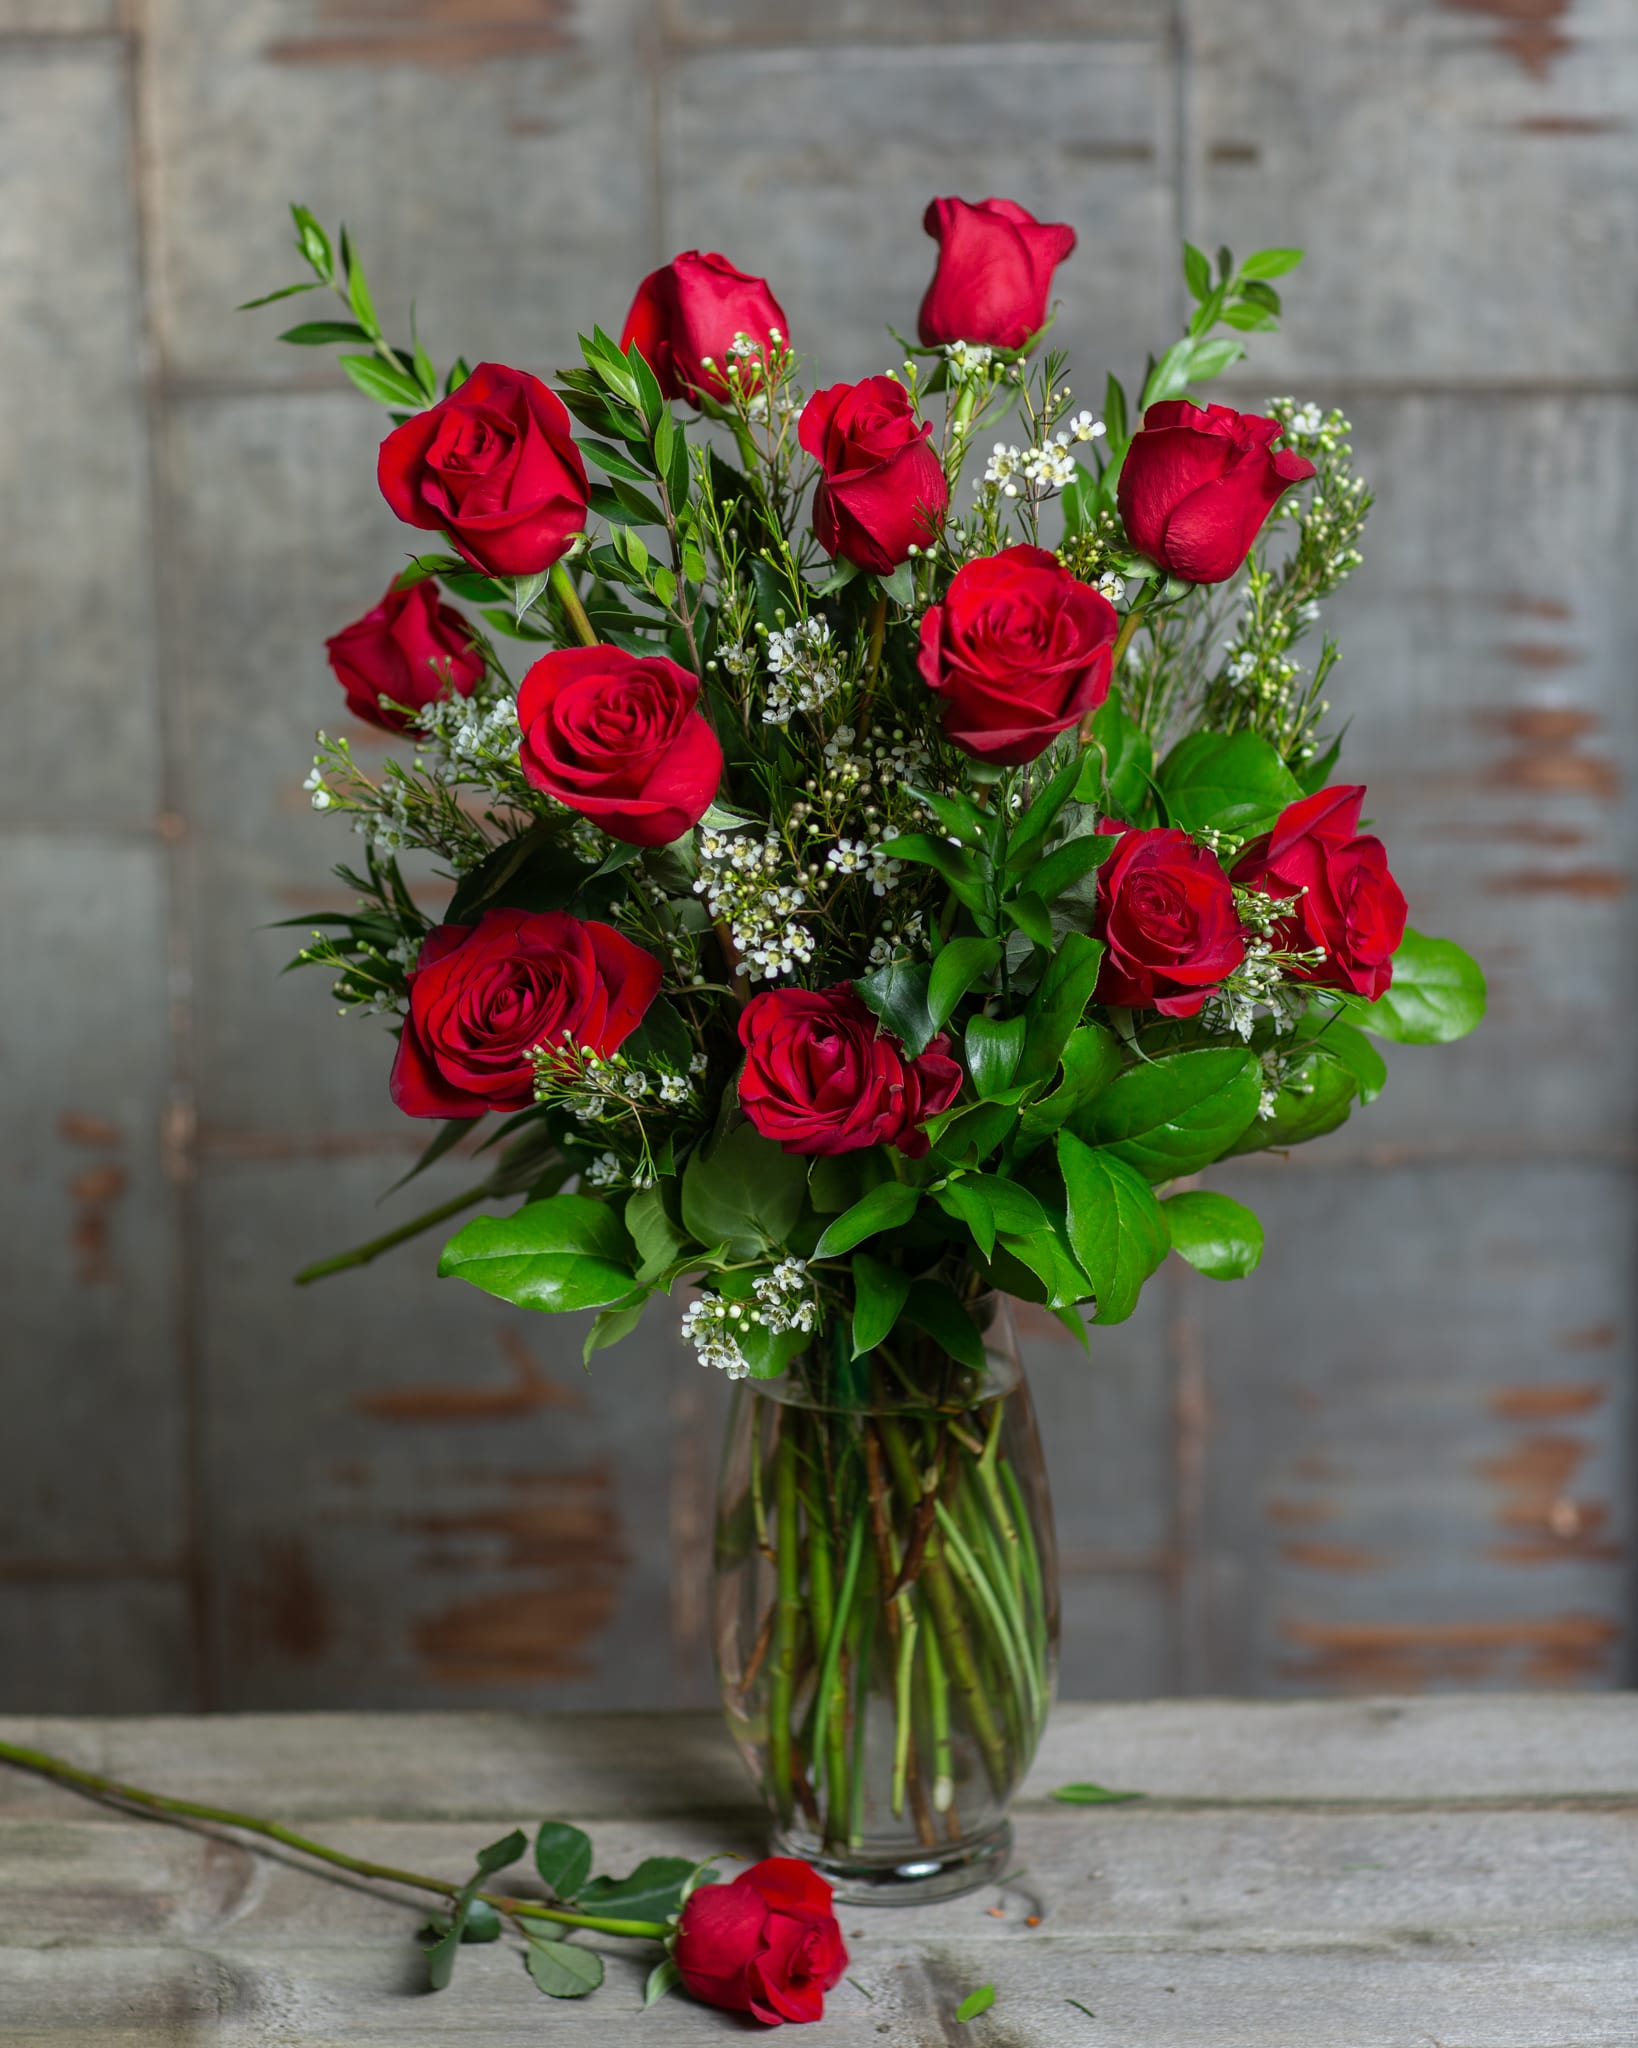 Red Roses - Simple, elegant, classic roses make a statement all by themselves. Red rose meaning: &quot;Love, I Love You&quot;. Two dozen (large) is $149.00 Designed in a vase and delivered by us, a real Portland florist to anywhere in the greater Portland Oregon area. Place your order online, or call us directly 503 223 1646